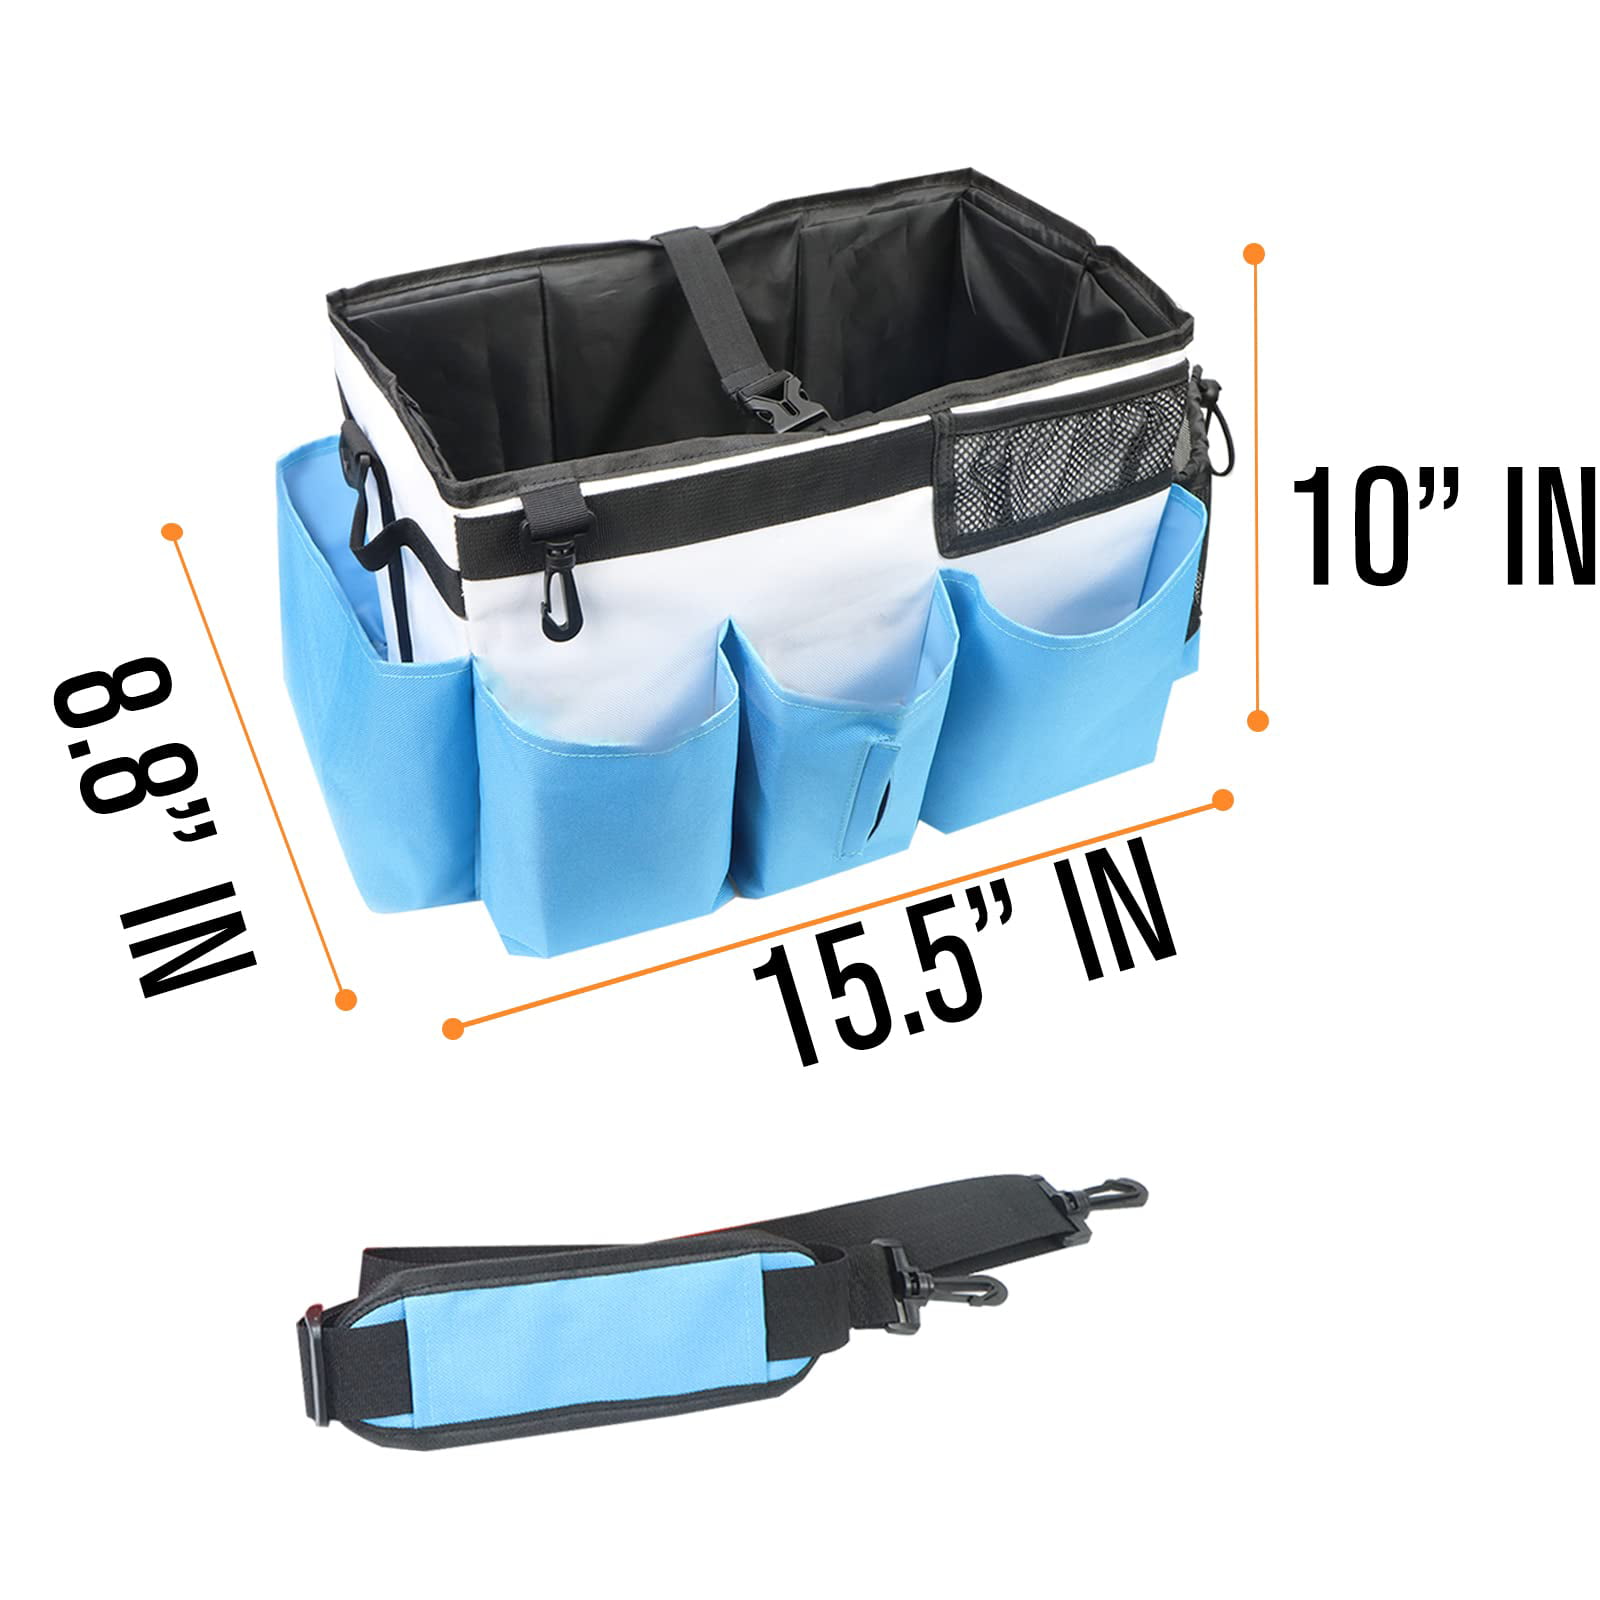  LandnEOO Portable Cleaning Caddy, Waterproof, Large, Wearable,  Strong, Versatile, 17 x 8 x 10